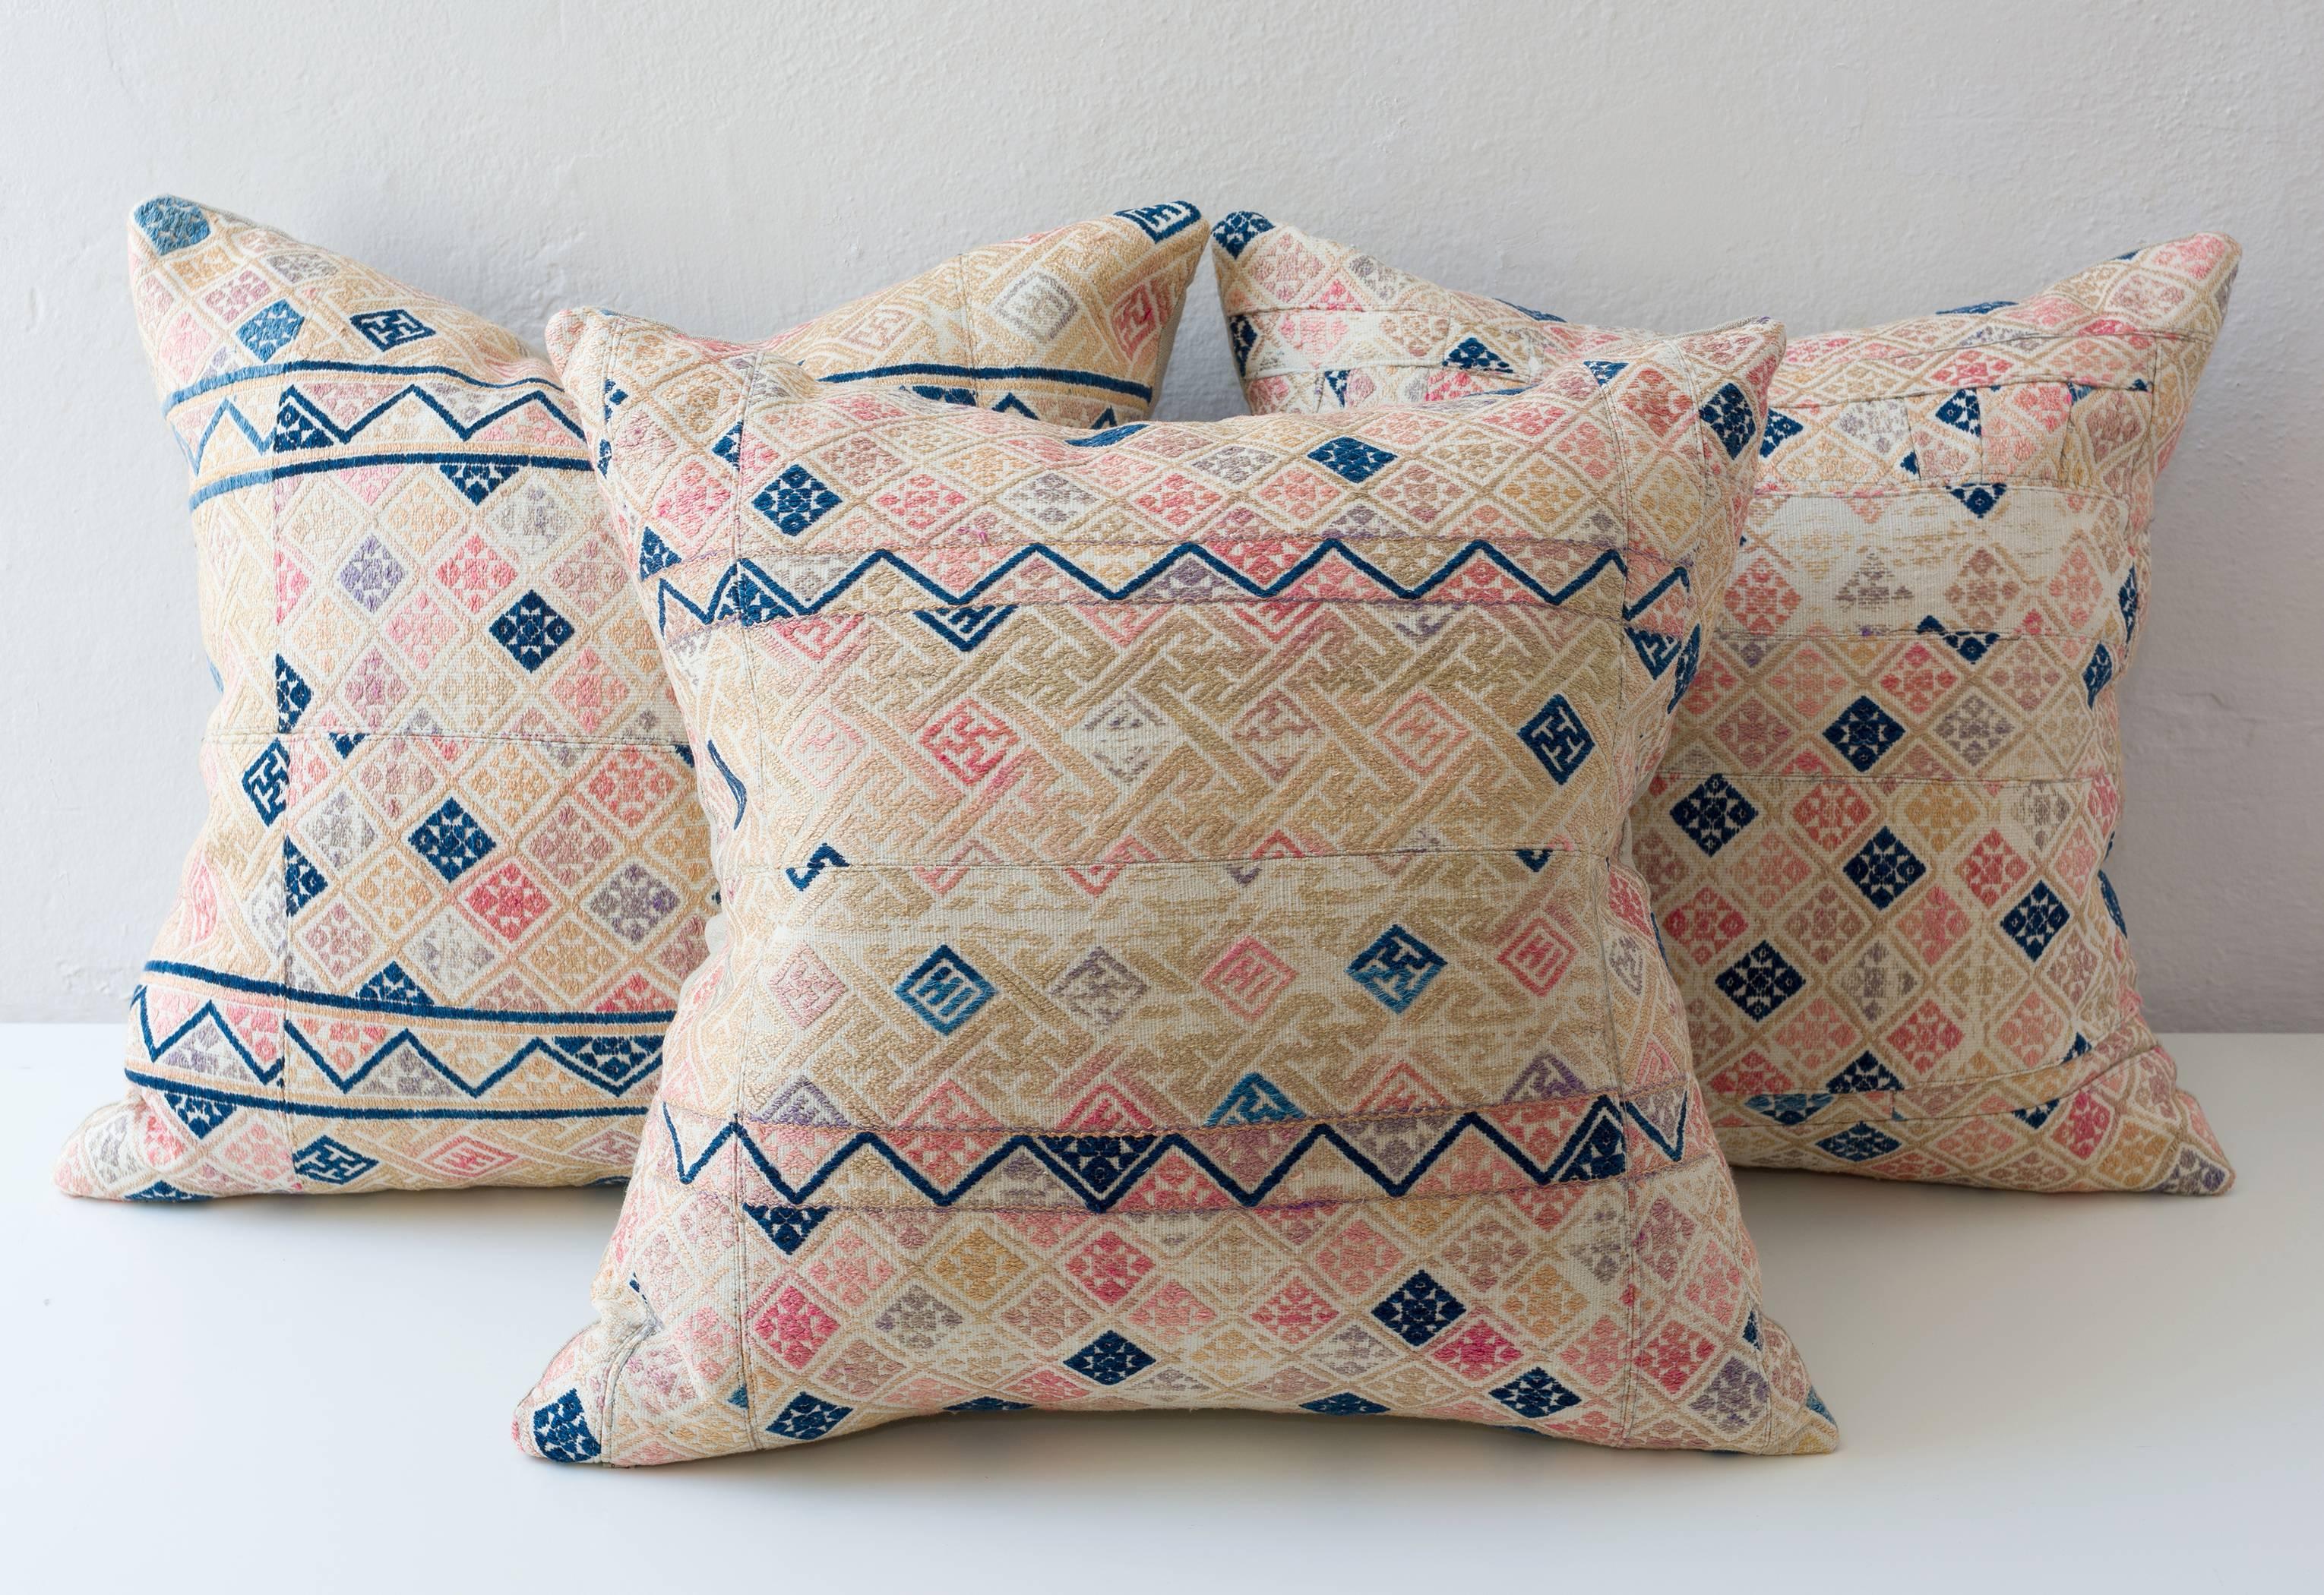 Zhuang Piecework Cushion in Pinks with Accents of Indigo In Excellent Condition For Sale In Los Angeles, CA